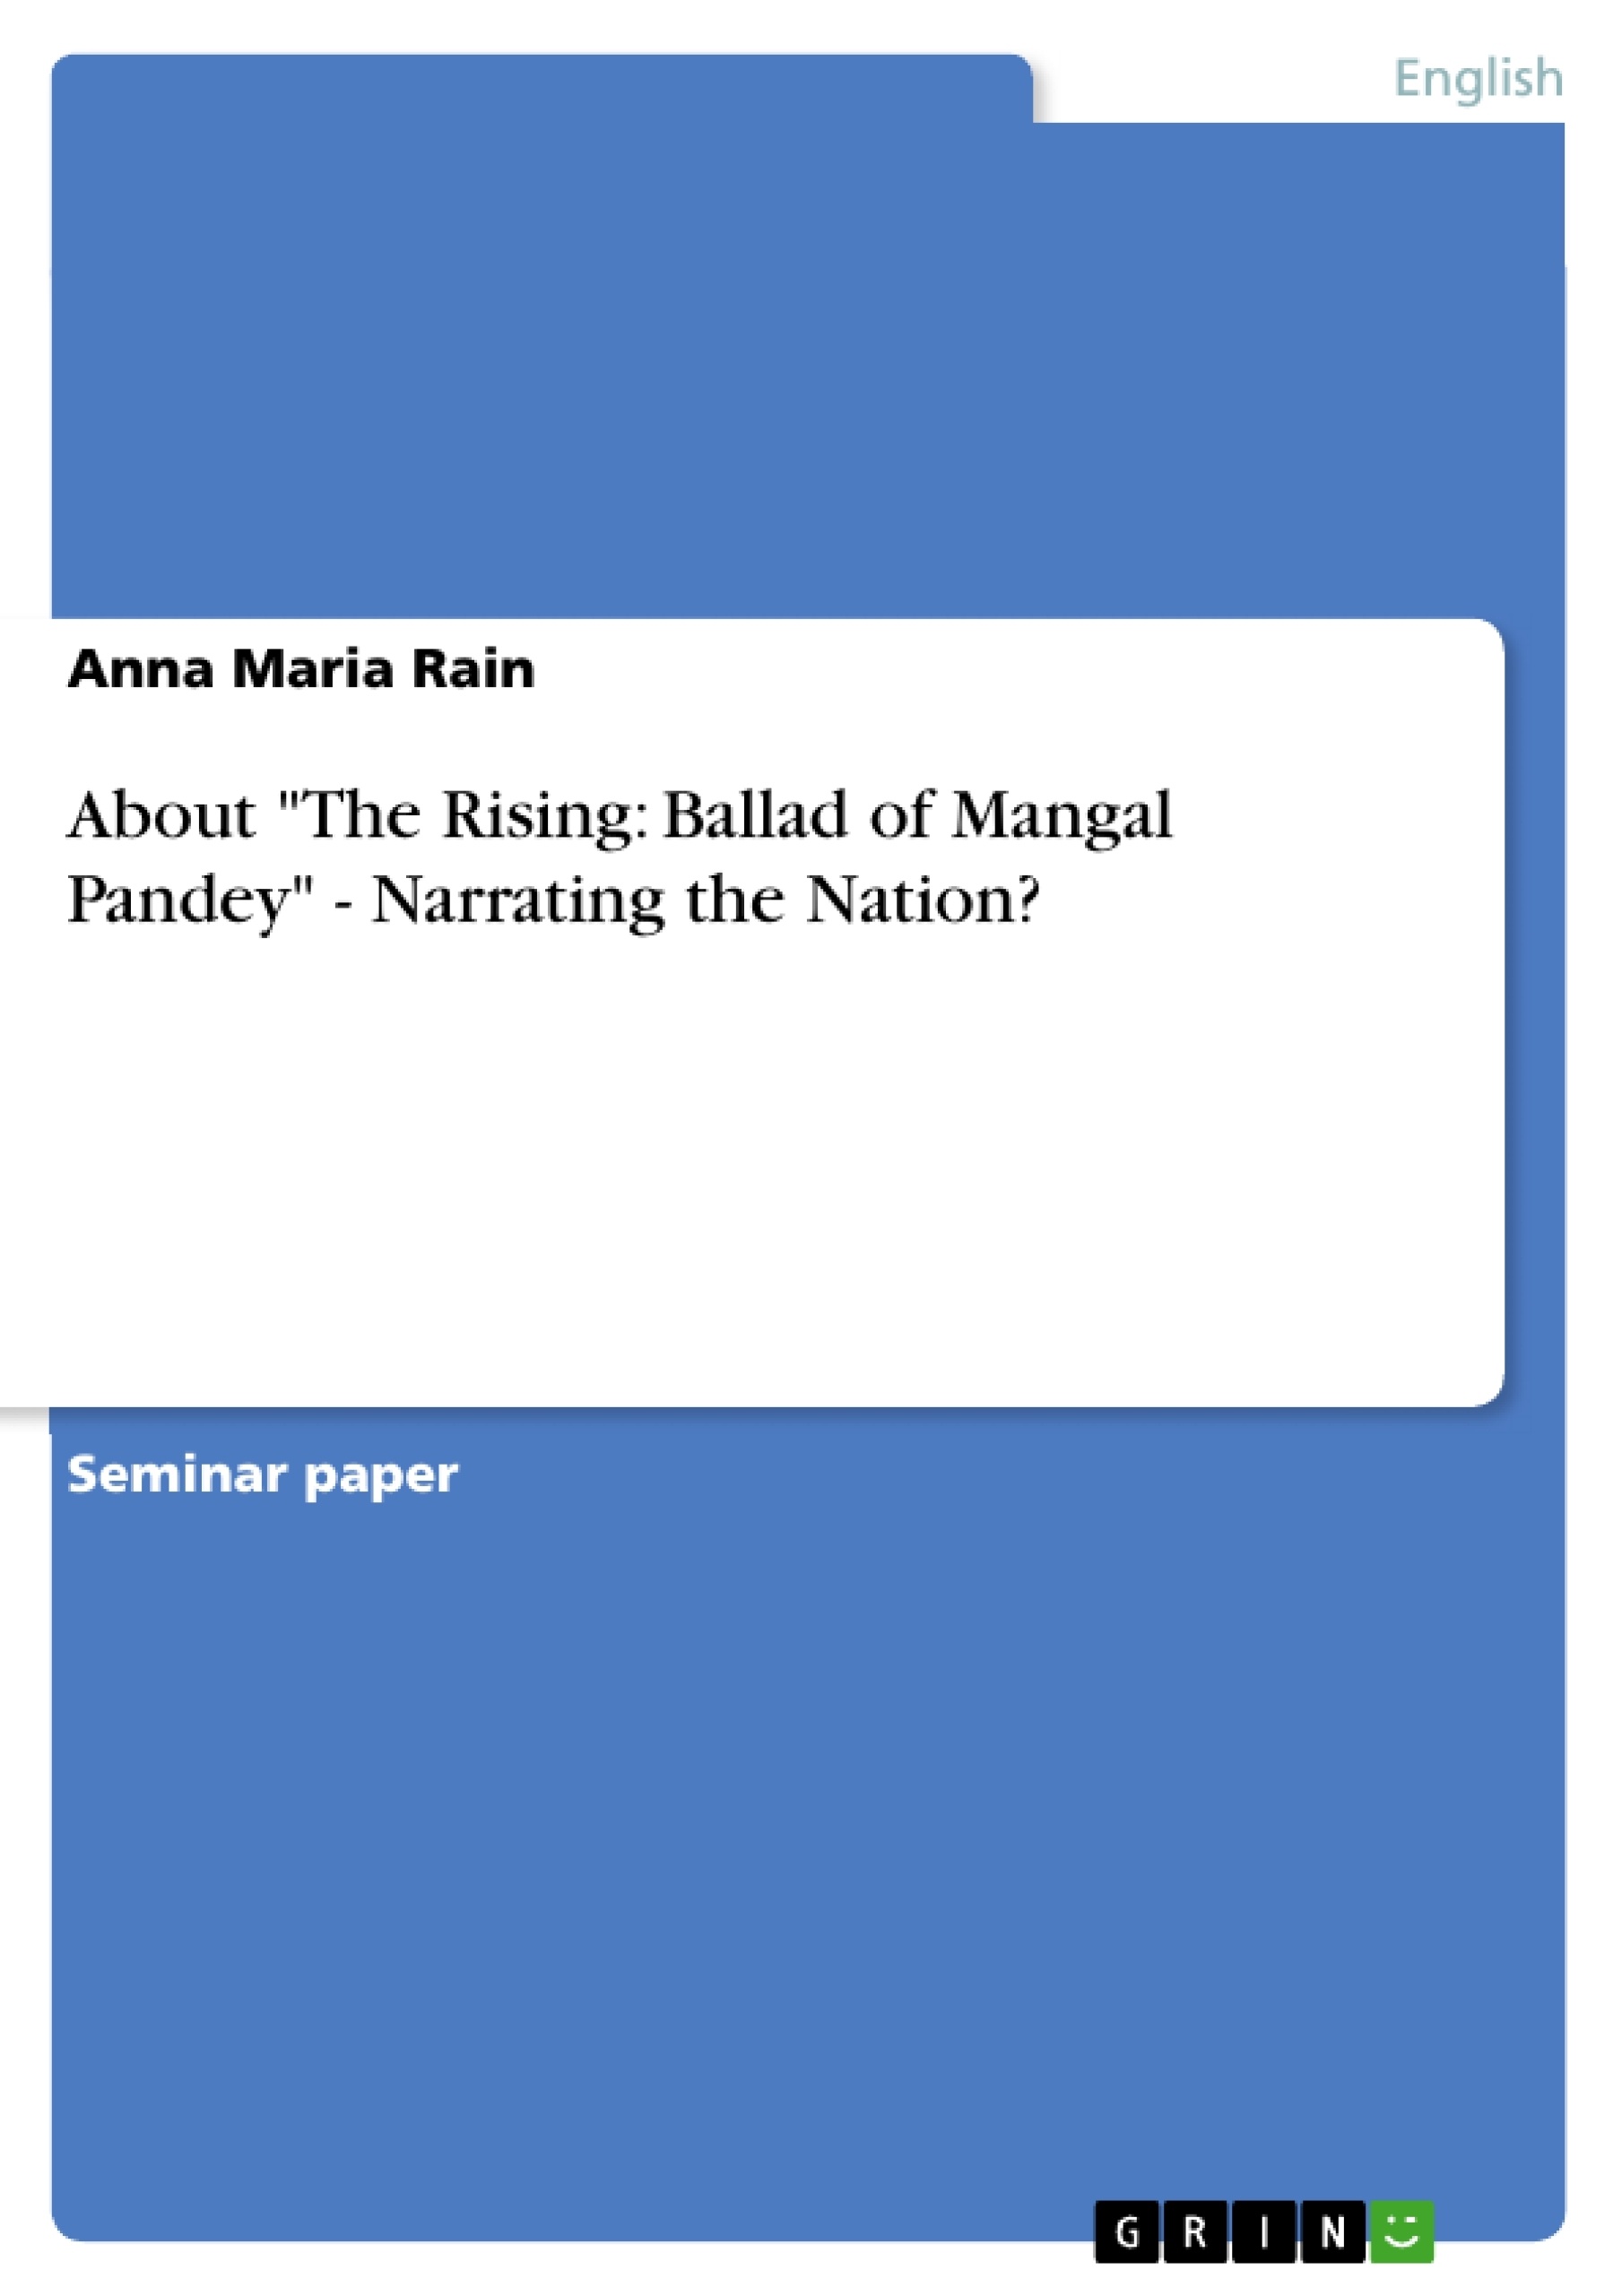 Titre: About "The Rising: Ballad of Mangal Pandey" - Narrating the Nation?